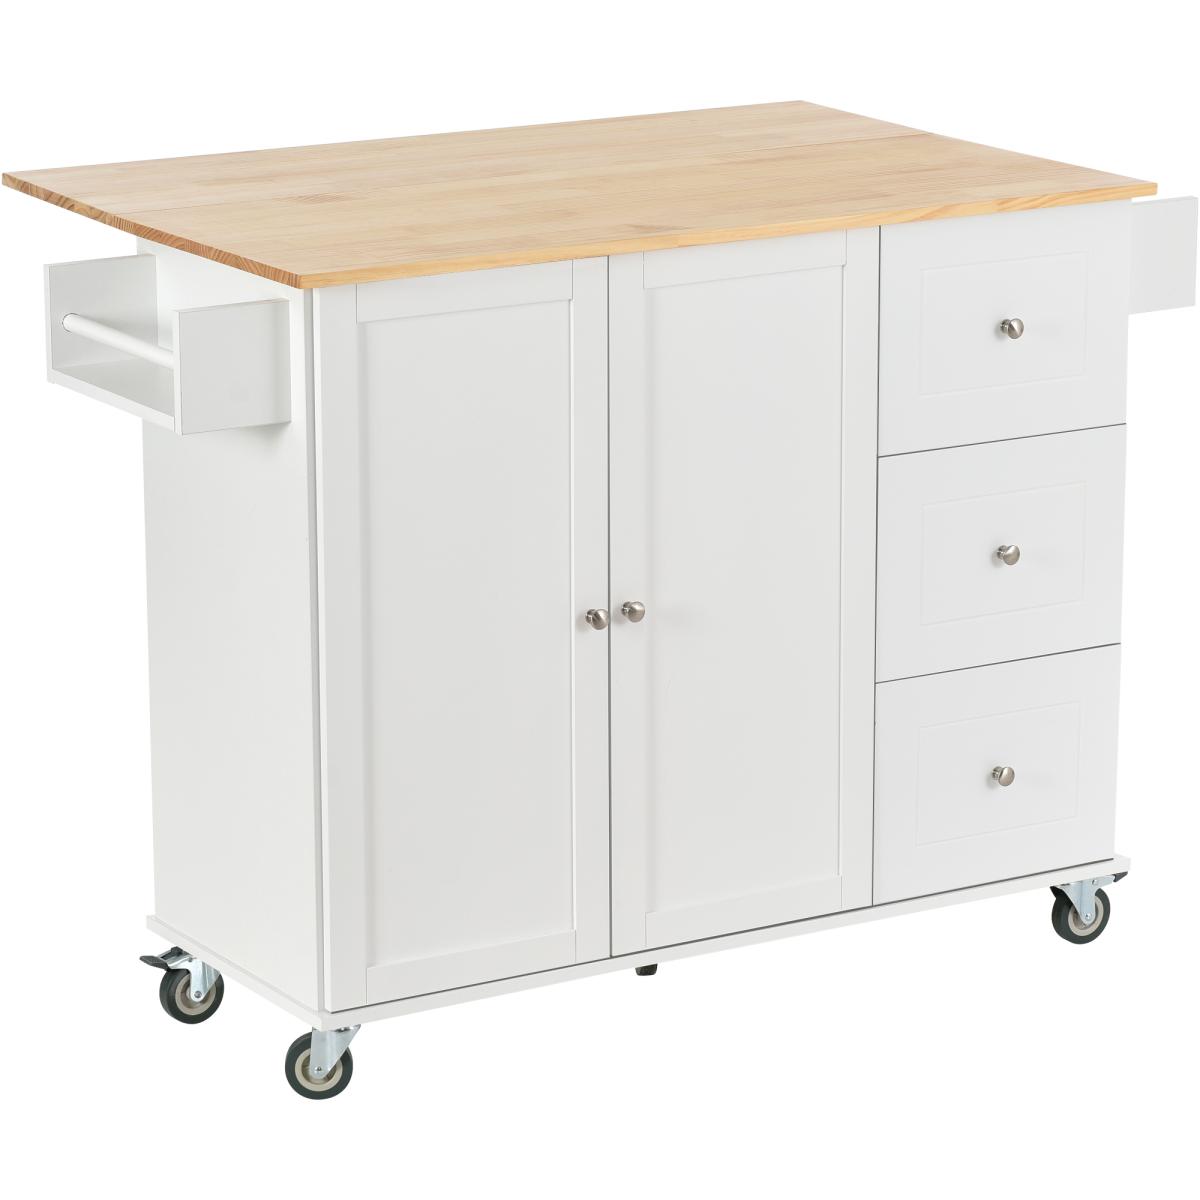 Rolling Mobile Kitchen Island with Solid Wood Top and Locking Wheels,52.7 Inch Width,Storage Cabinet and Drop Leaf Breakfast Bar,Spice Rack, Towel Rack & Drawer (White)